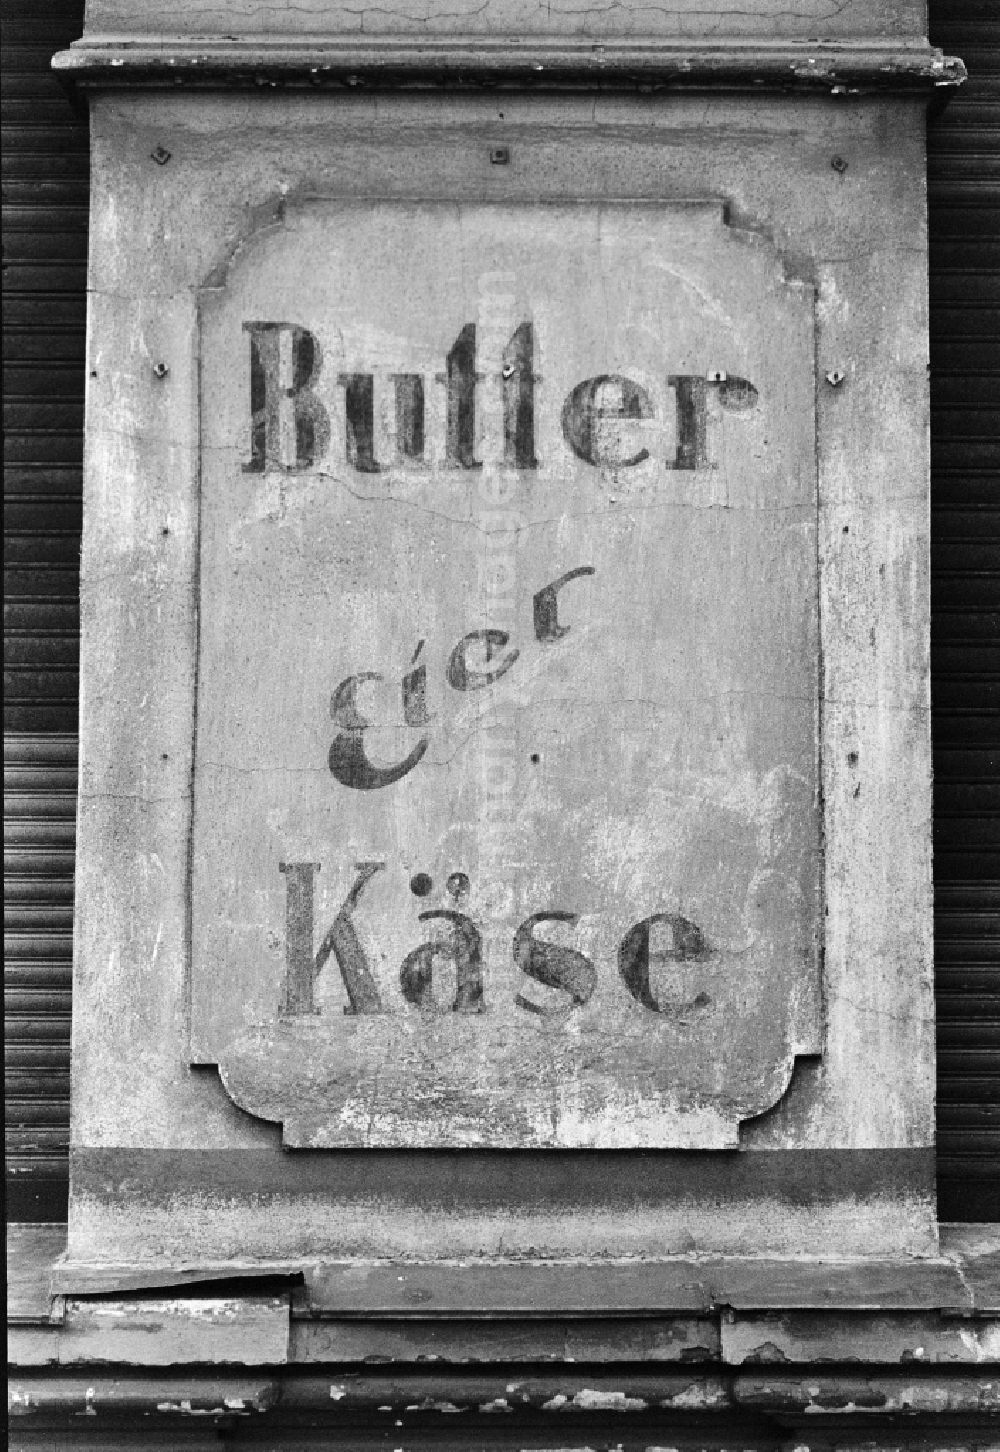 GDR image archive: Berlin - Promotional sign for butter, eggs and cheese of a consumption in Berlin, the former capital of the GDR, German democratic republic